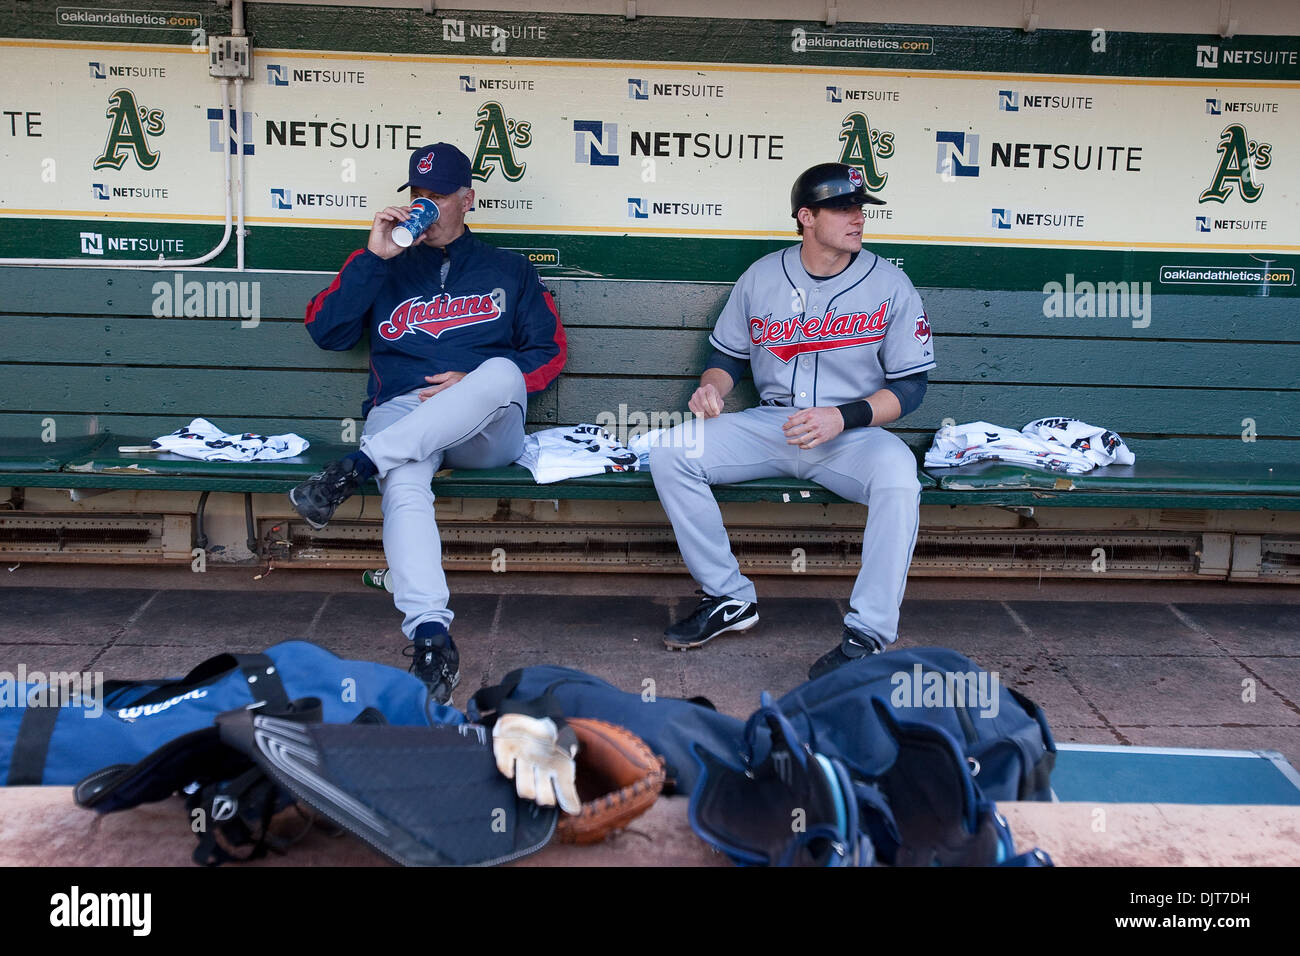 Oakland, Calif. - Cleveland Indians C Lou Marson (30) sits on the bench with pitching Coach Tim Belcher (49) during pregame warmups on Friday at the Oakland-Alameda County Coliseum. The Oakland Athletics defeated the Cleveland Indians 10-0. (Credit Image: © Konsta Goumenidis/Southcreek Global/ZUMApress.com) Stock Photo